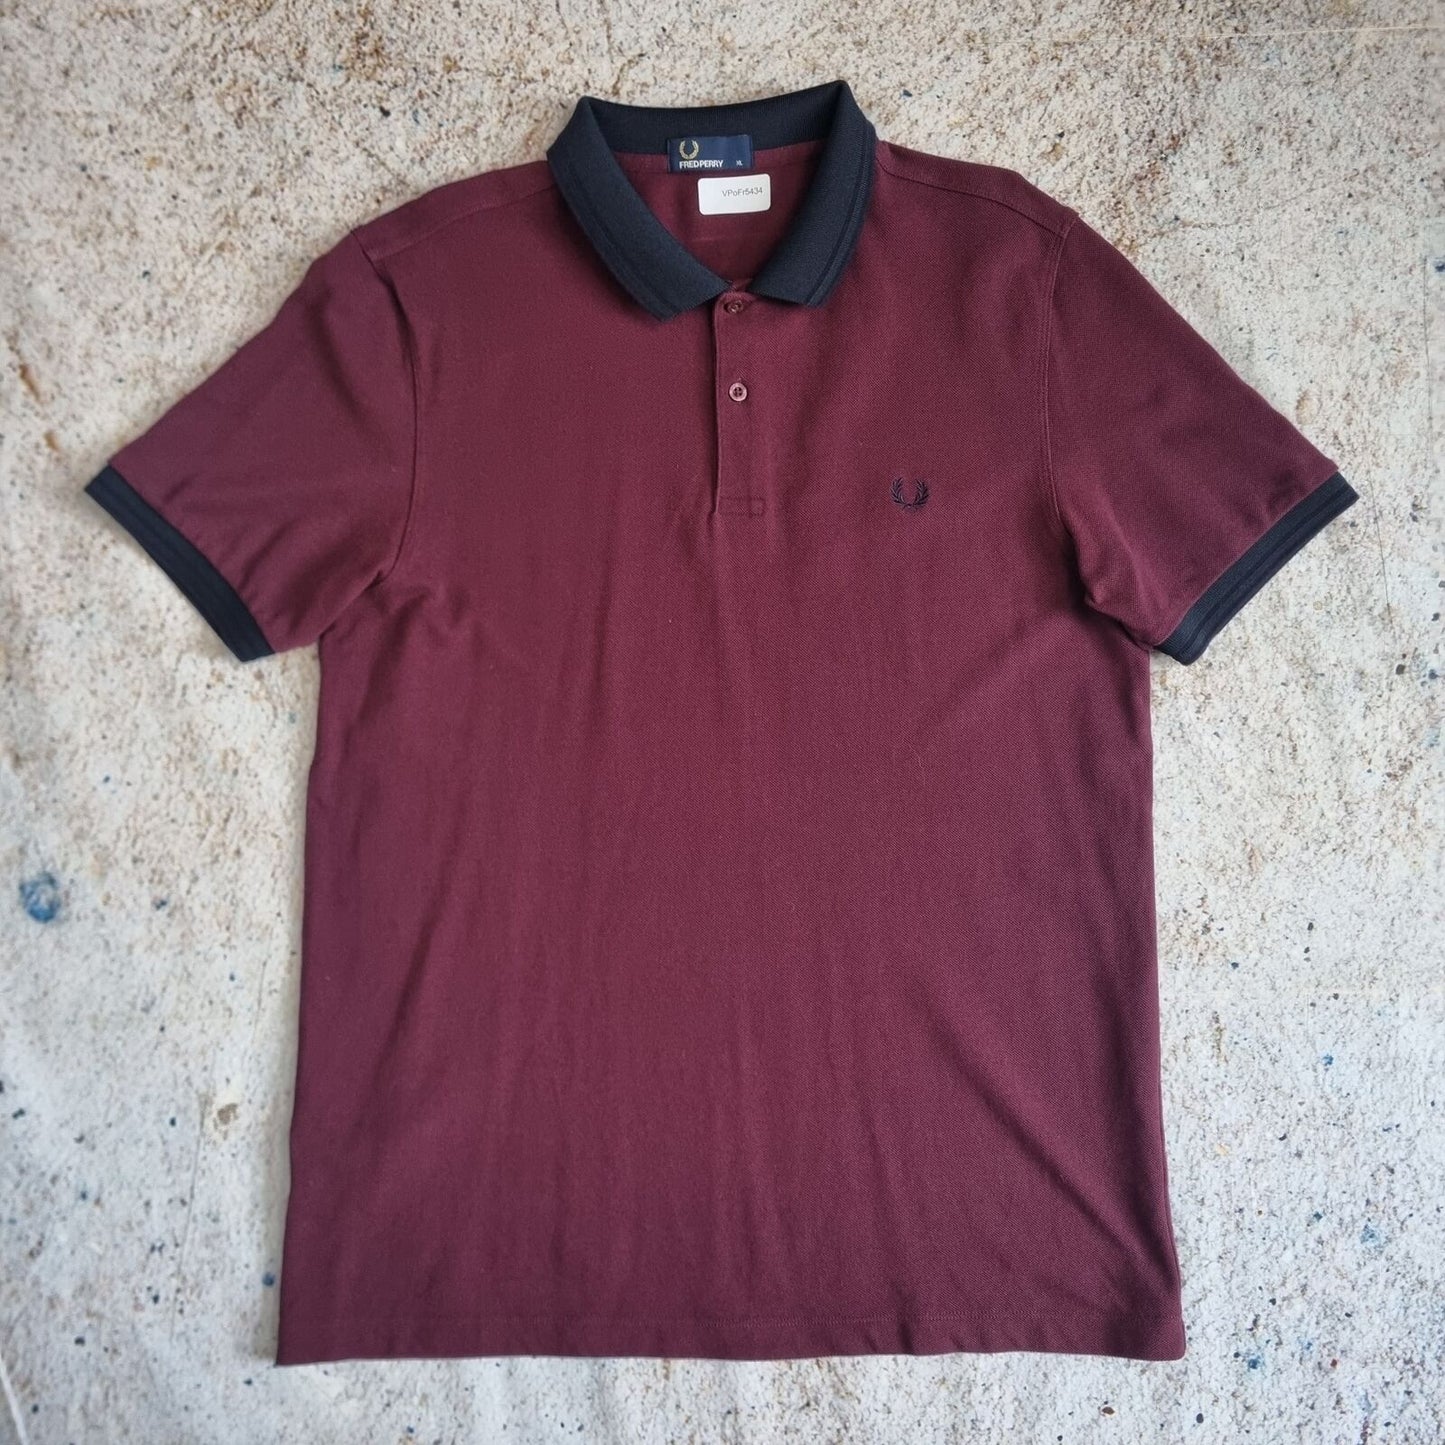 Fred Perry POLO SHIRT BURGUNDY BLUE COLLAR - Red - Size XL